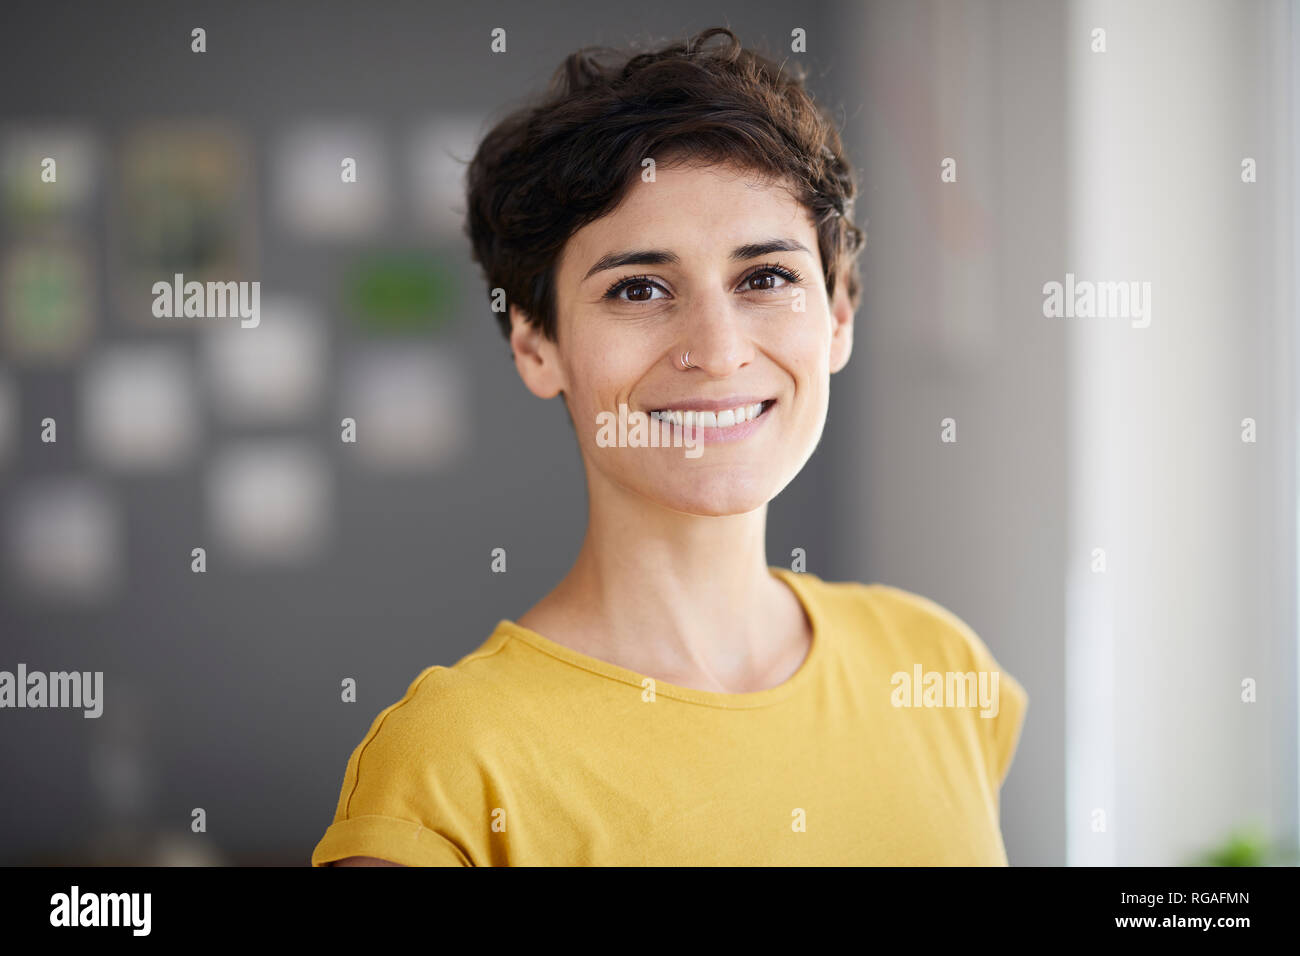 Portrait of smiling woman at home Banque D'Images